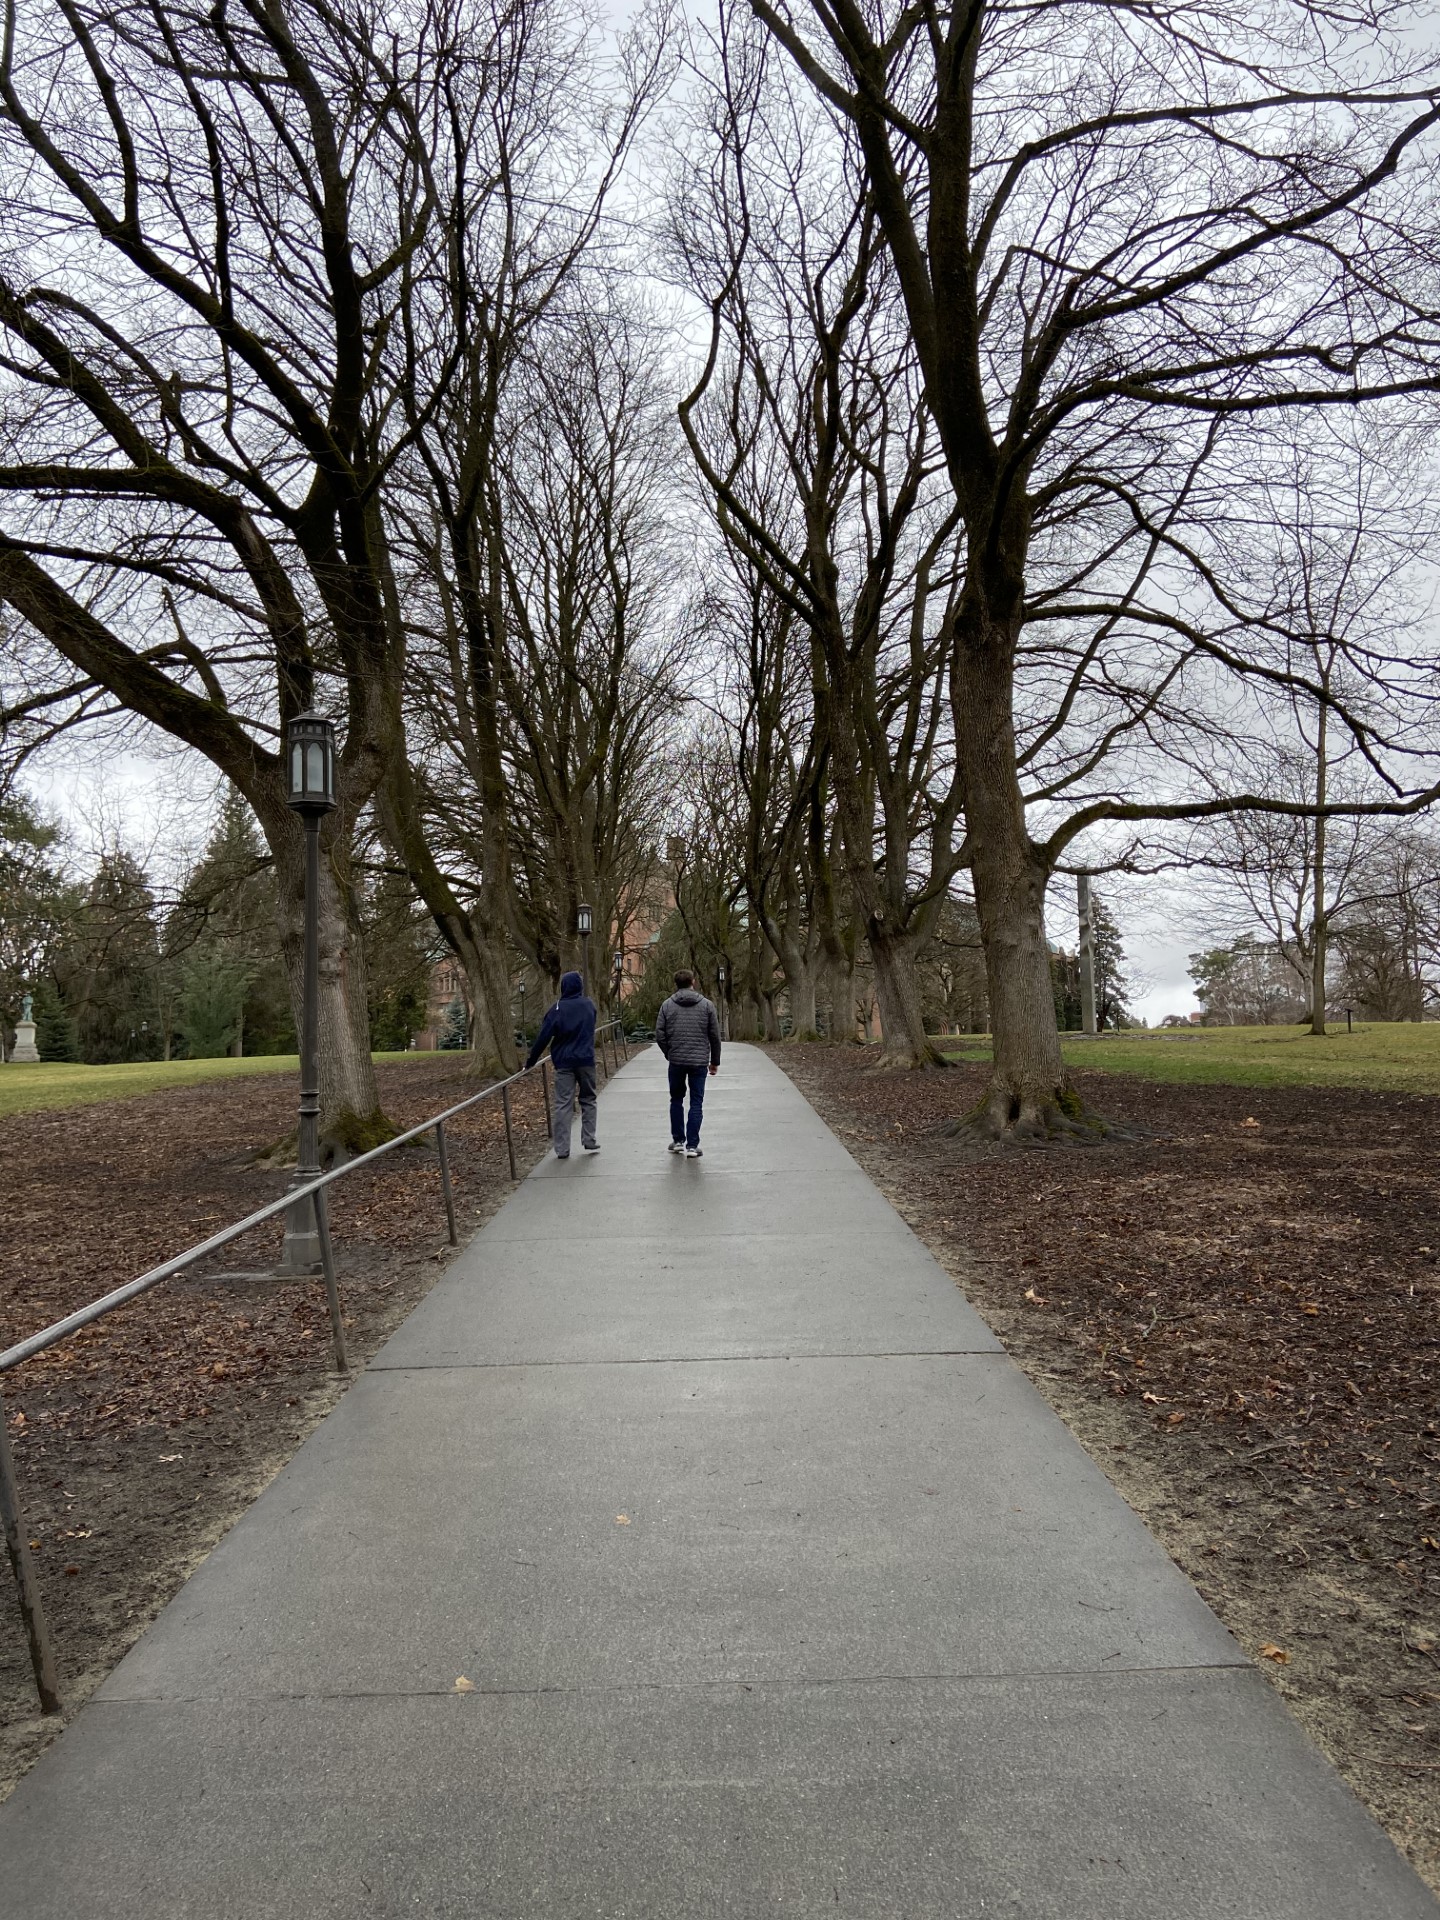 The murders of Kaylee Goncalves, Madison Mogen, Xana Kernodle and Ethan Chapin were extremely devastating for family members of the victims and students at University of Idaho. Pictured above is the Hello Walk located on the University of Idaho campus, leading to the administration building. Students are trying to heal since the tragedy happened.